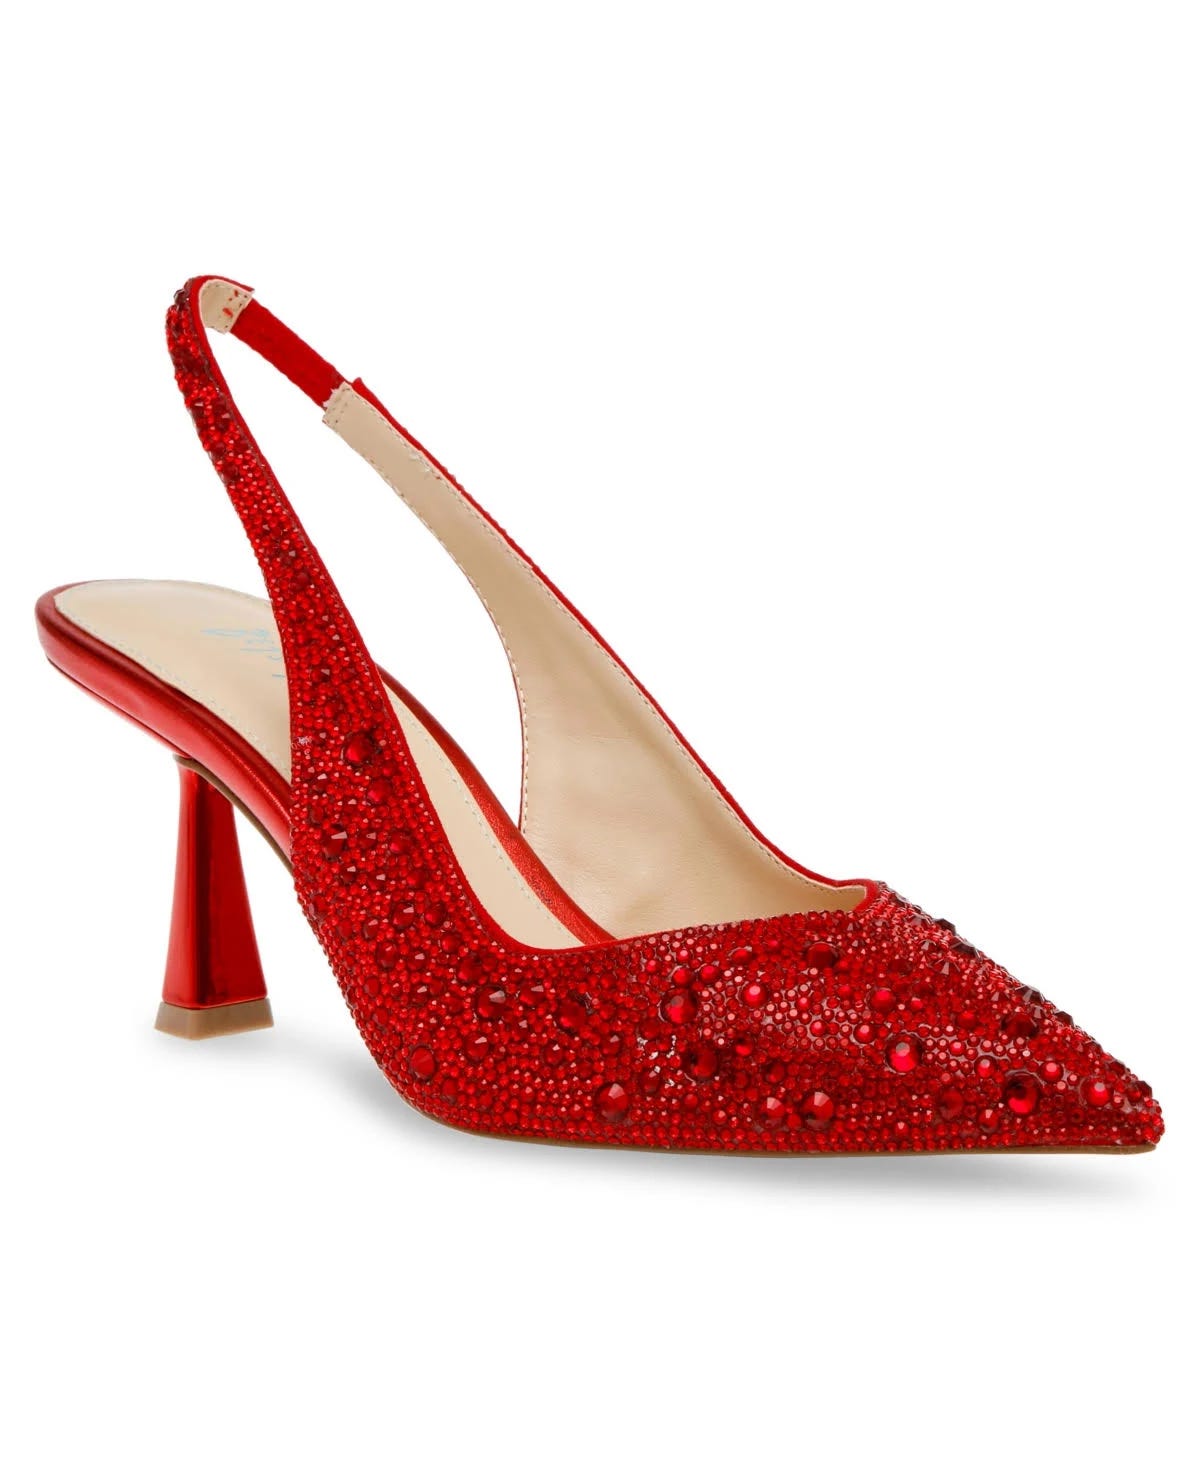 Glamorous Red Slingback Evening Pumps by Betsey Johnson | Image